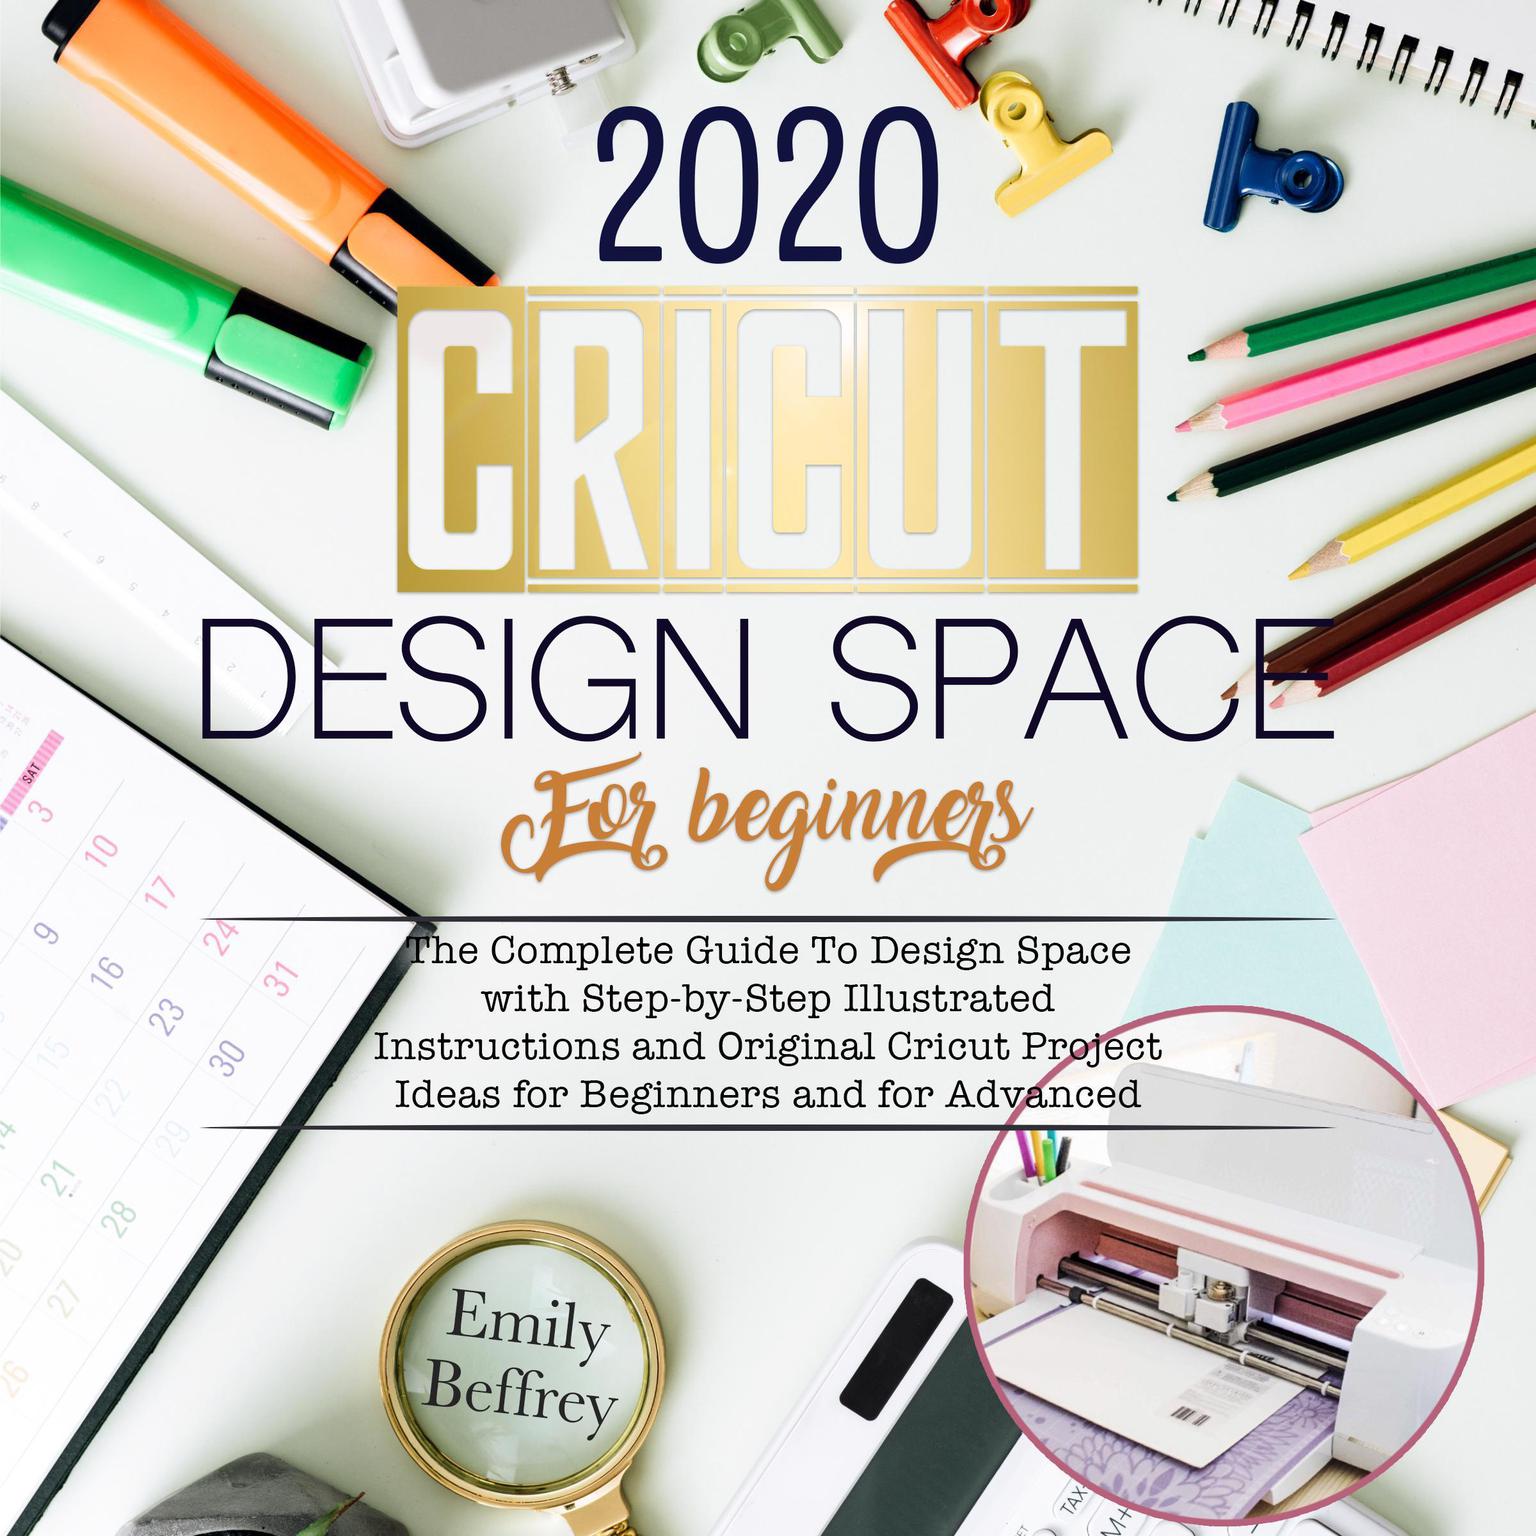 Cricut Design Space For Beginners 2020: The Complete Guide to Design Space with Step-by-Step Illustrated Instructions and Original Cricut Project Ideas for Beginners and For Advanced Audiobook, by Emily Beffrey